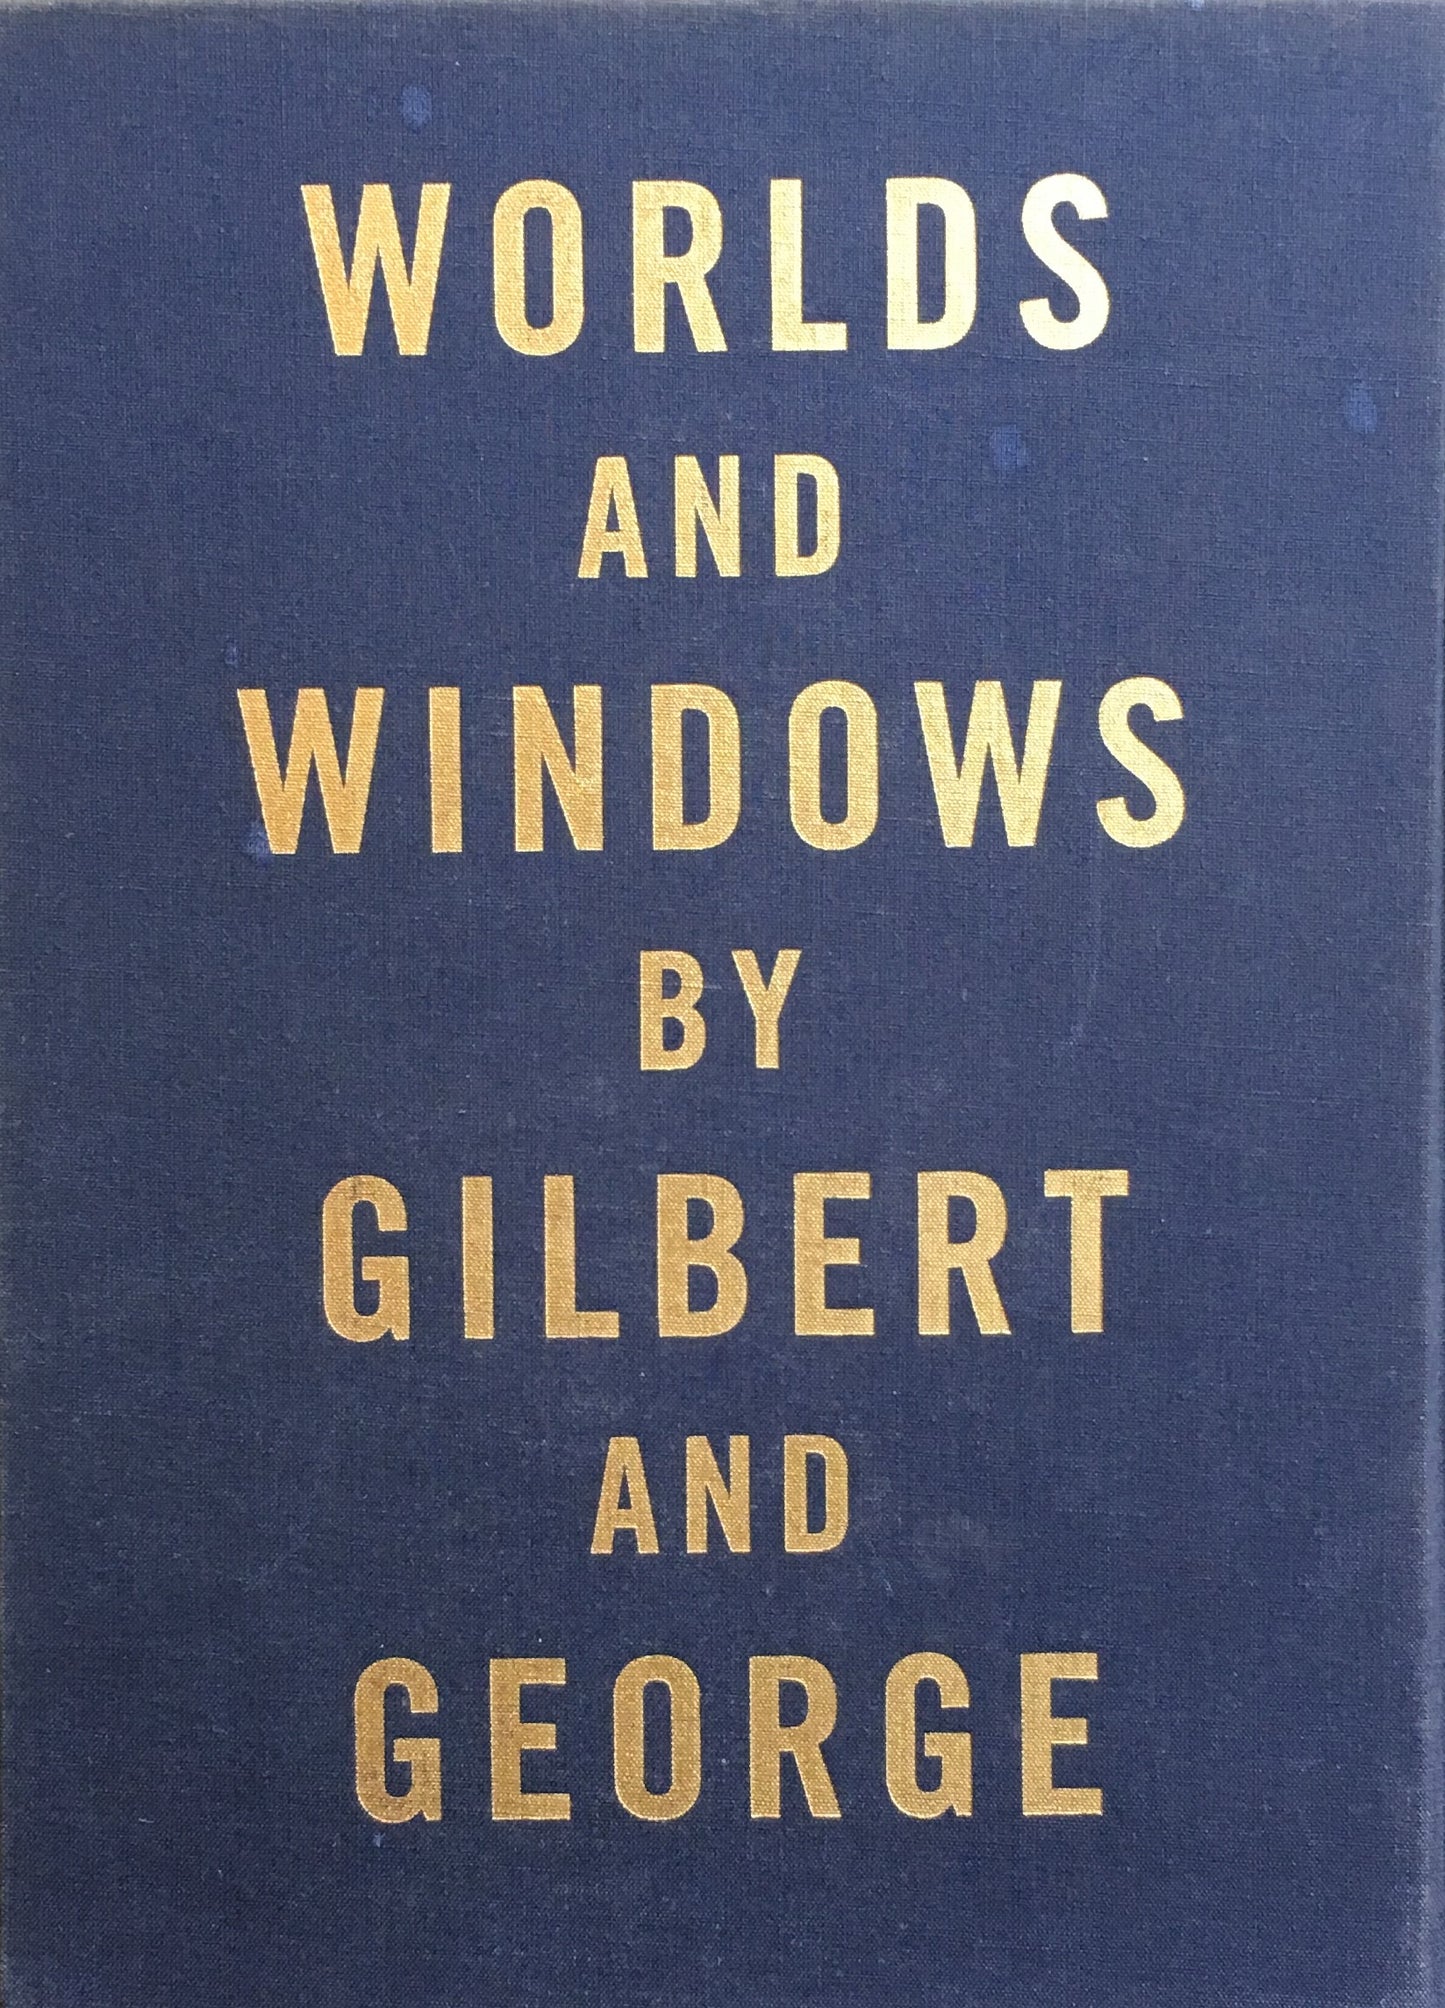 WORLDS AND WINDOWS BY GILBERT AND GEORGE　ギルバート＆ジョージ